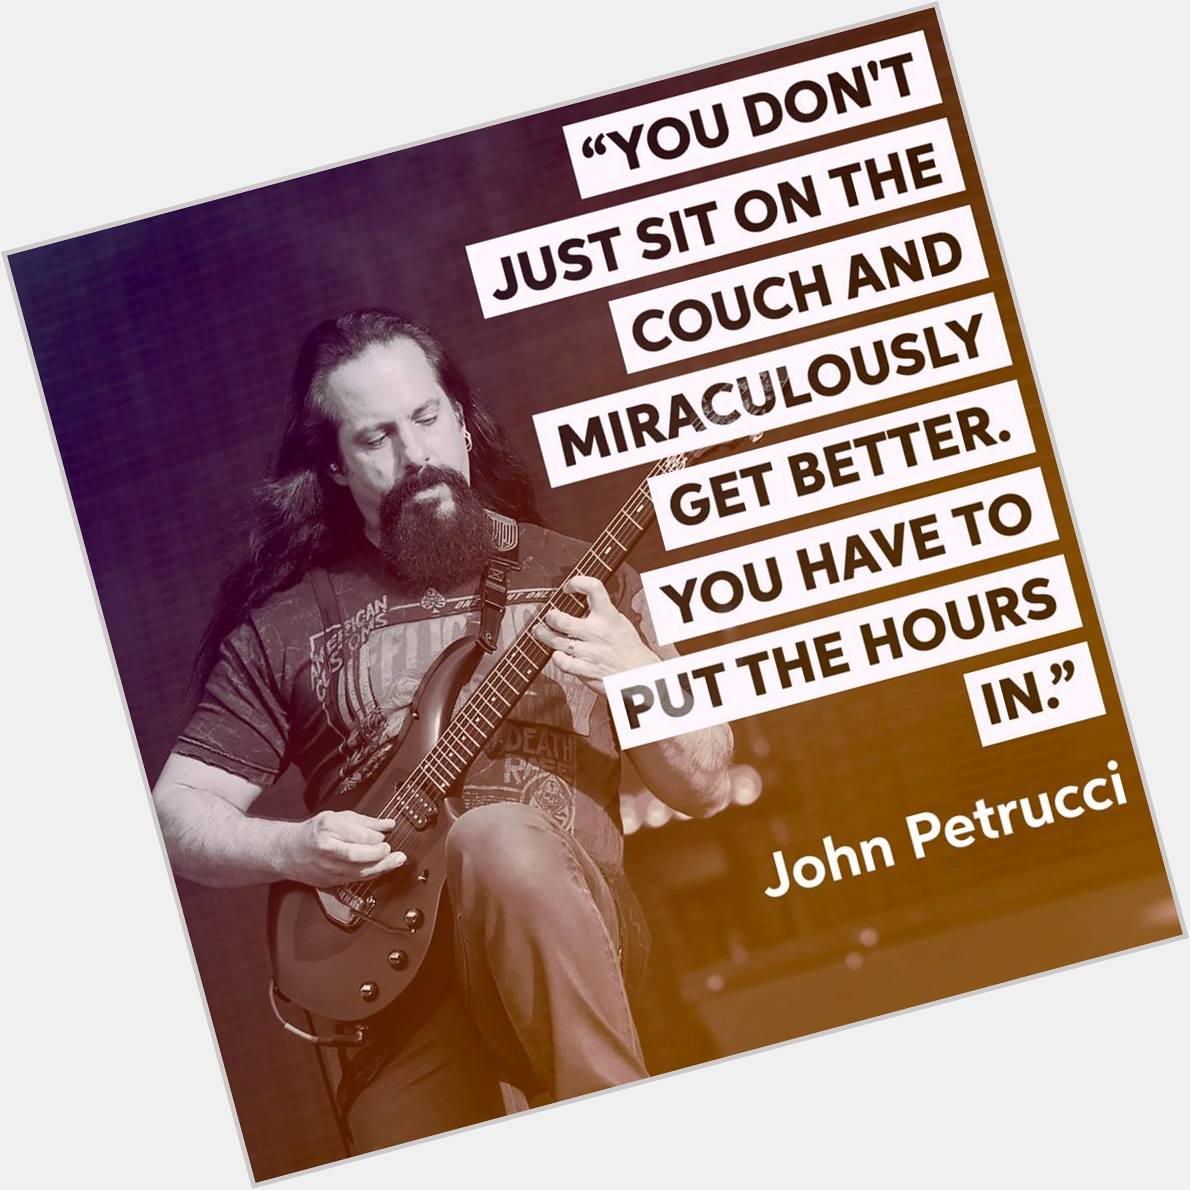 Happy 50th birthday to the amazing John Petrucci! See our interview with John here  